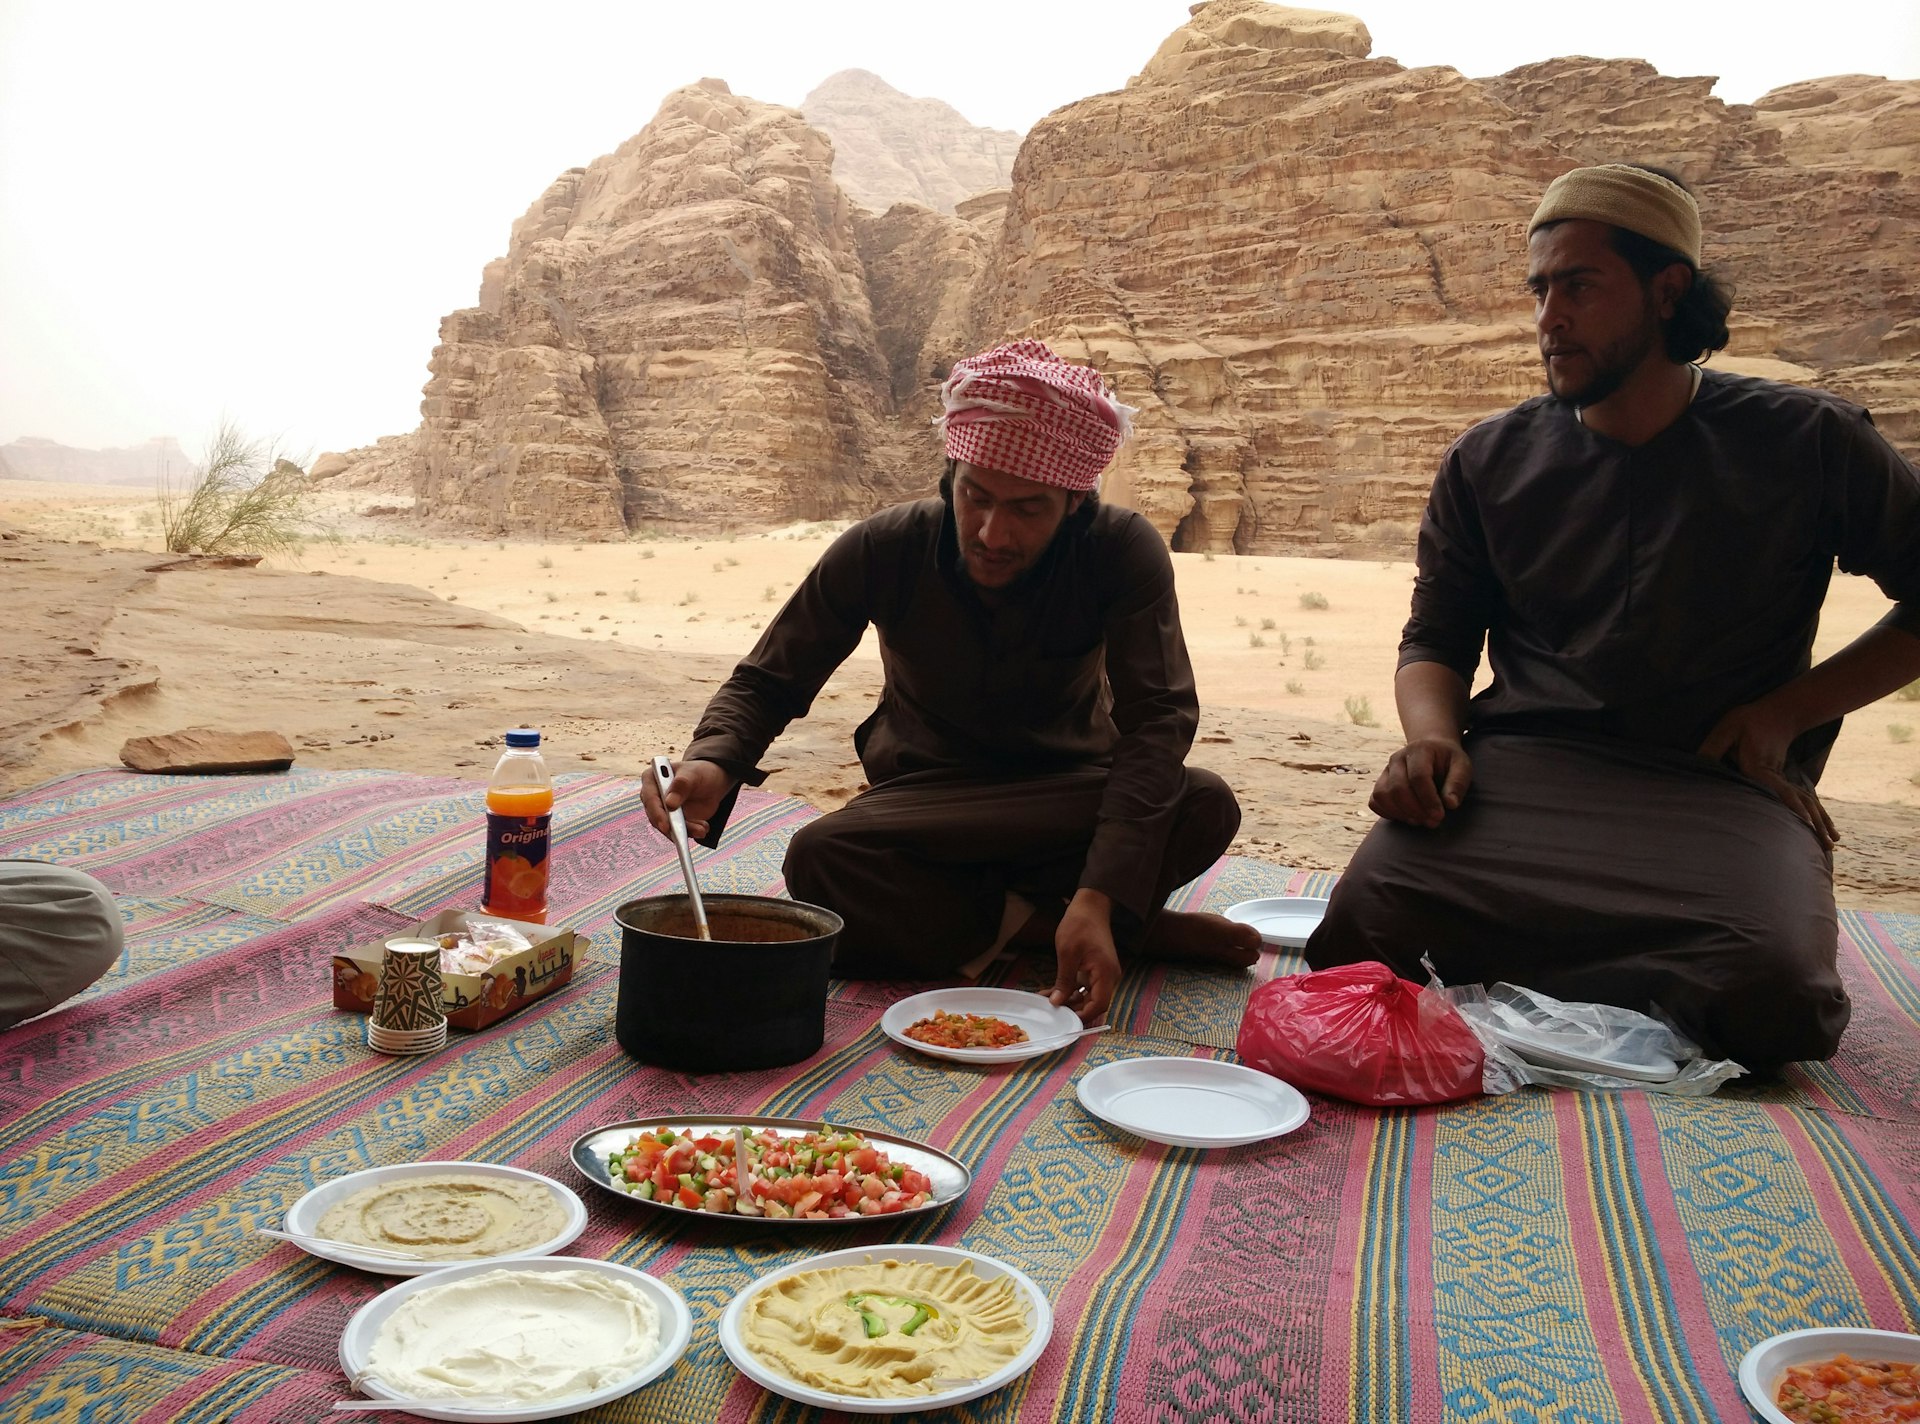 Two Bedouin men eat food on a brightly striped carpets in the desert of Jordan